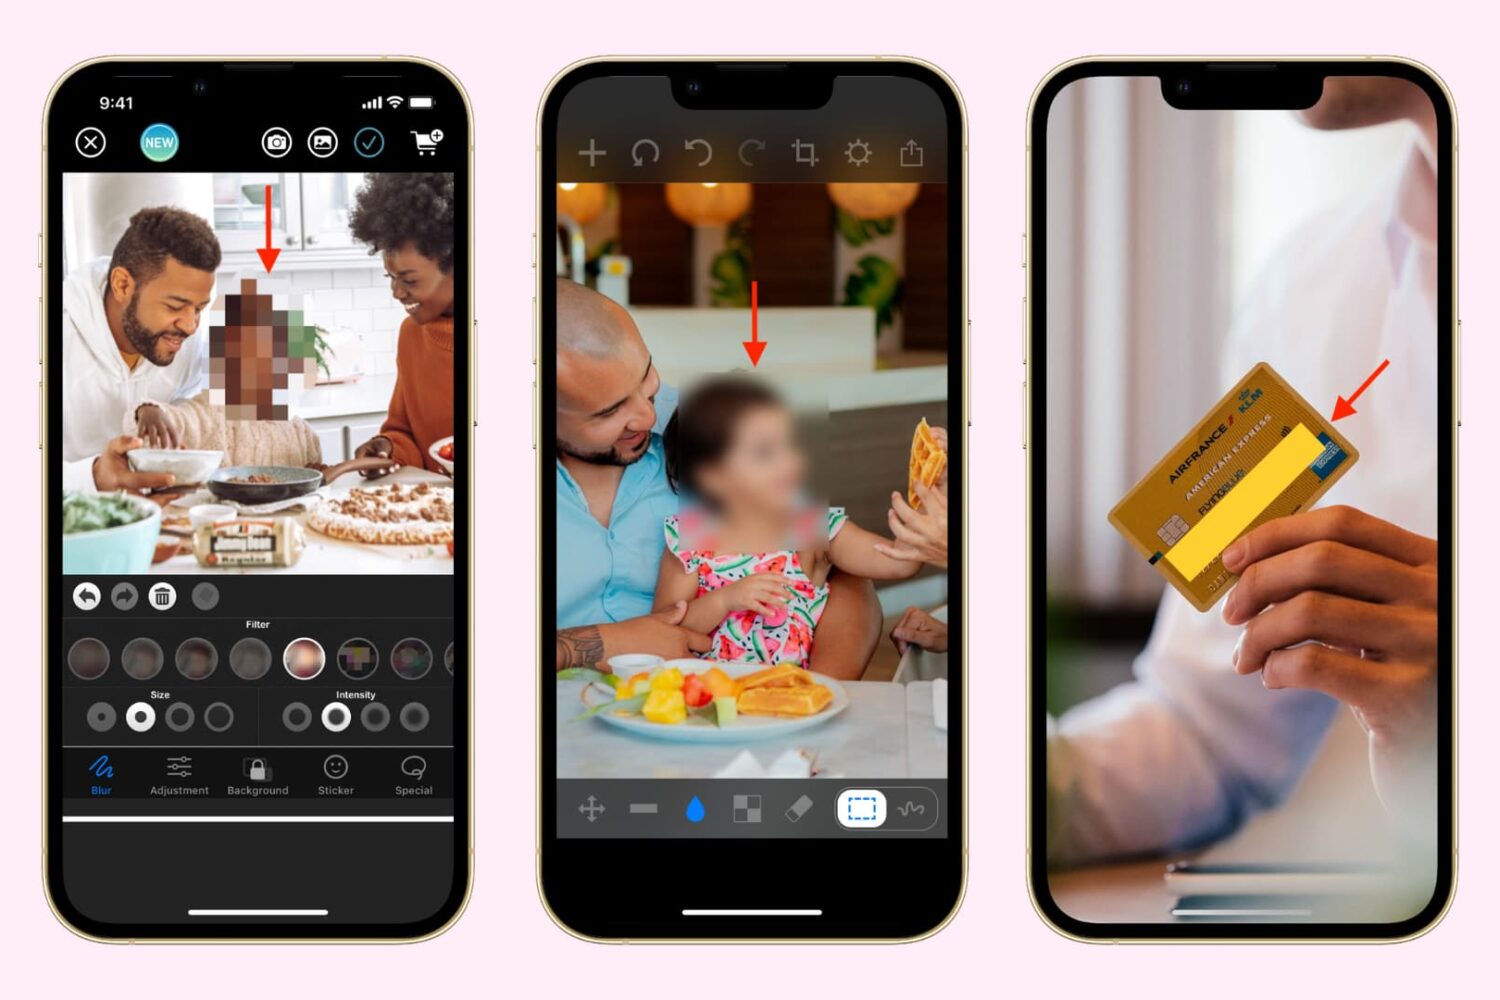 Blur, pixelate, and hide sensitive parts of an image on iPhone